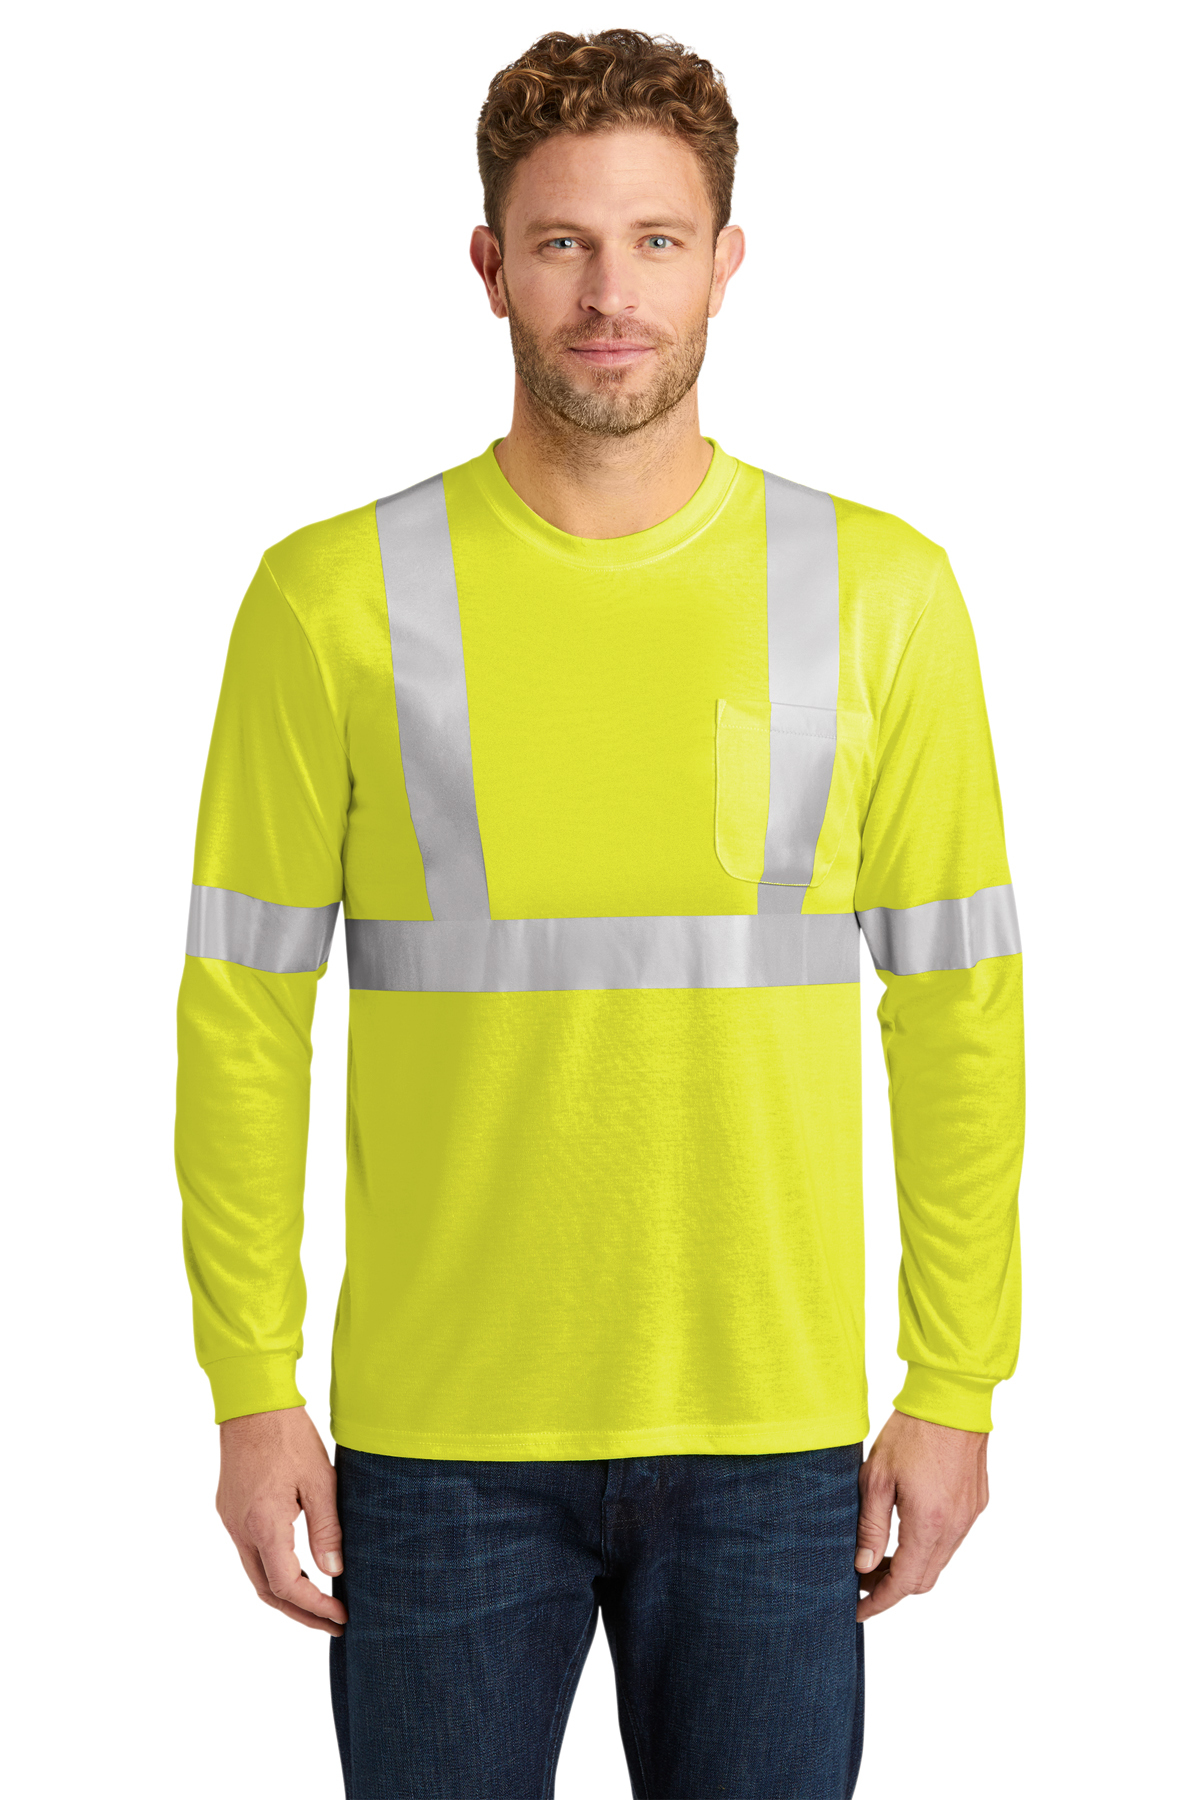 click to view Safety Yellow/Reflective